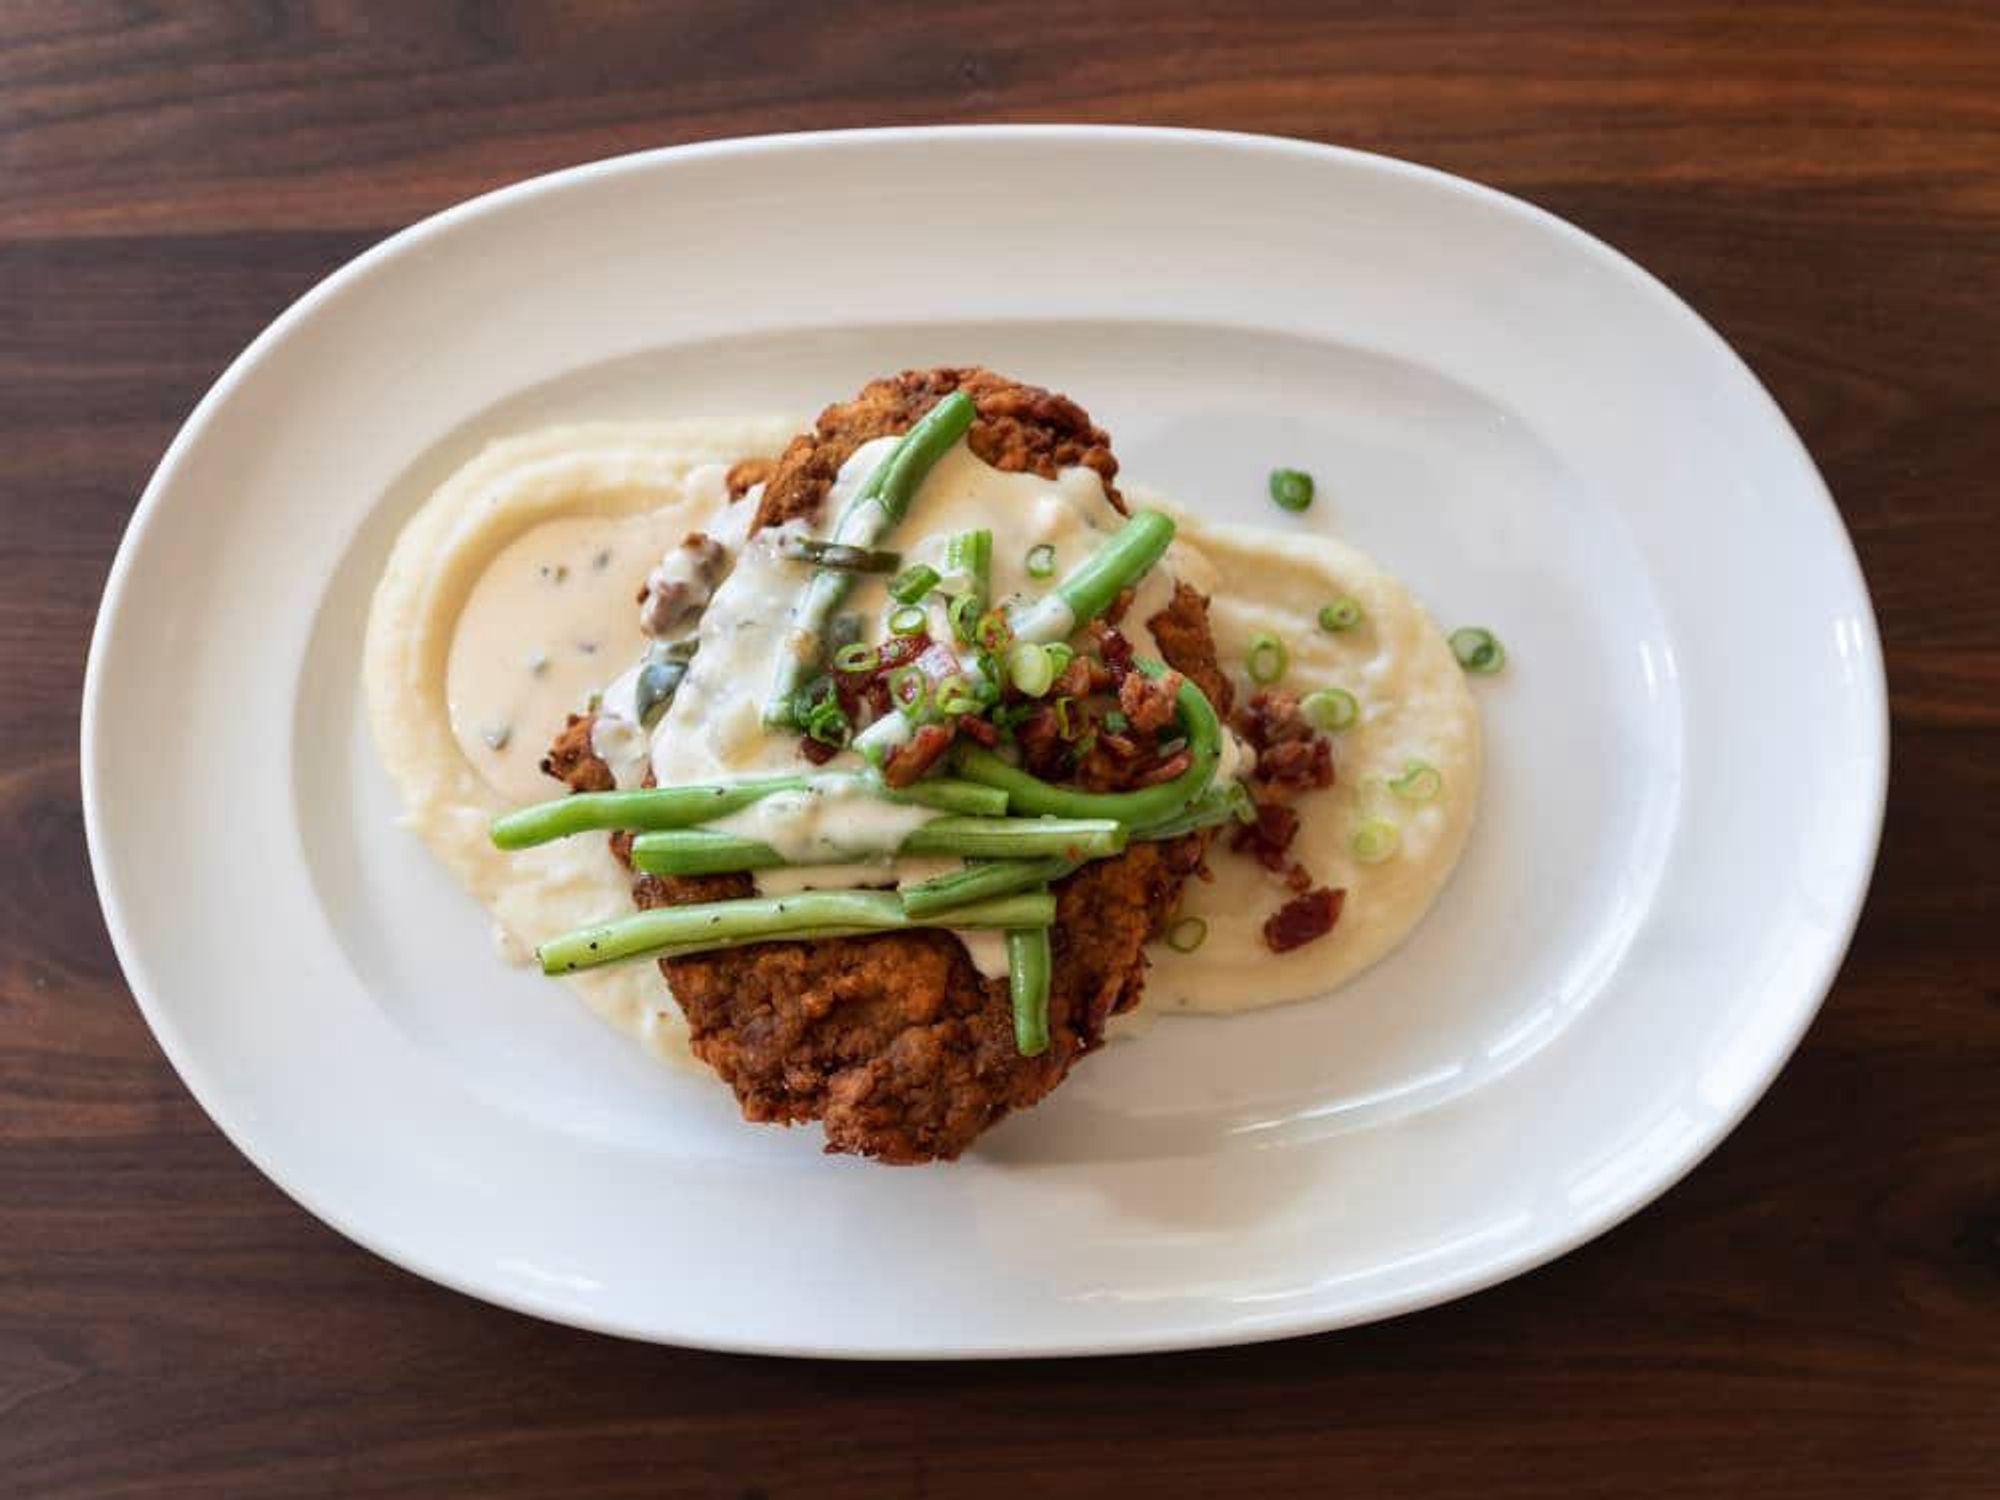 Chicken fried steak is can't miss at Wild Oats.